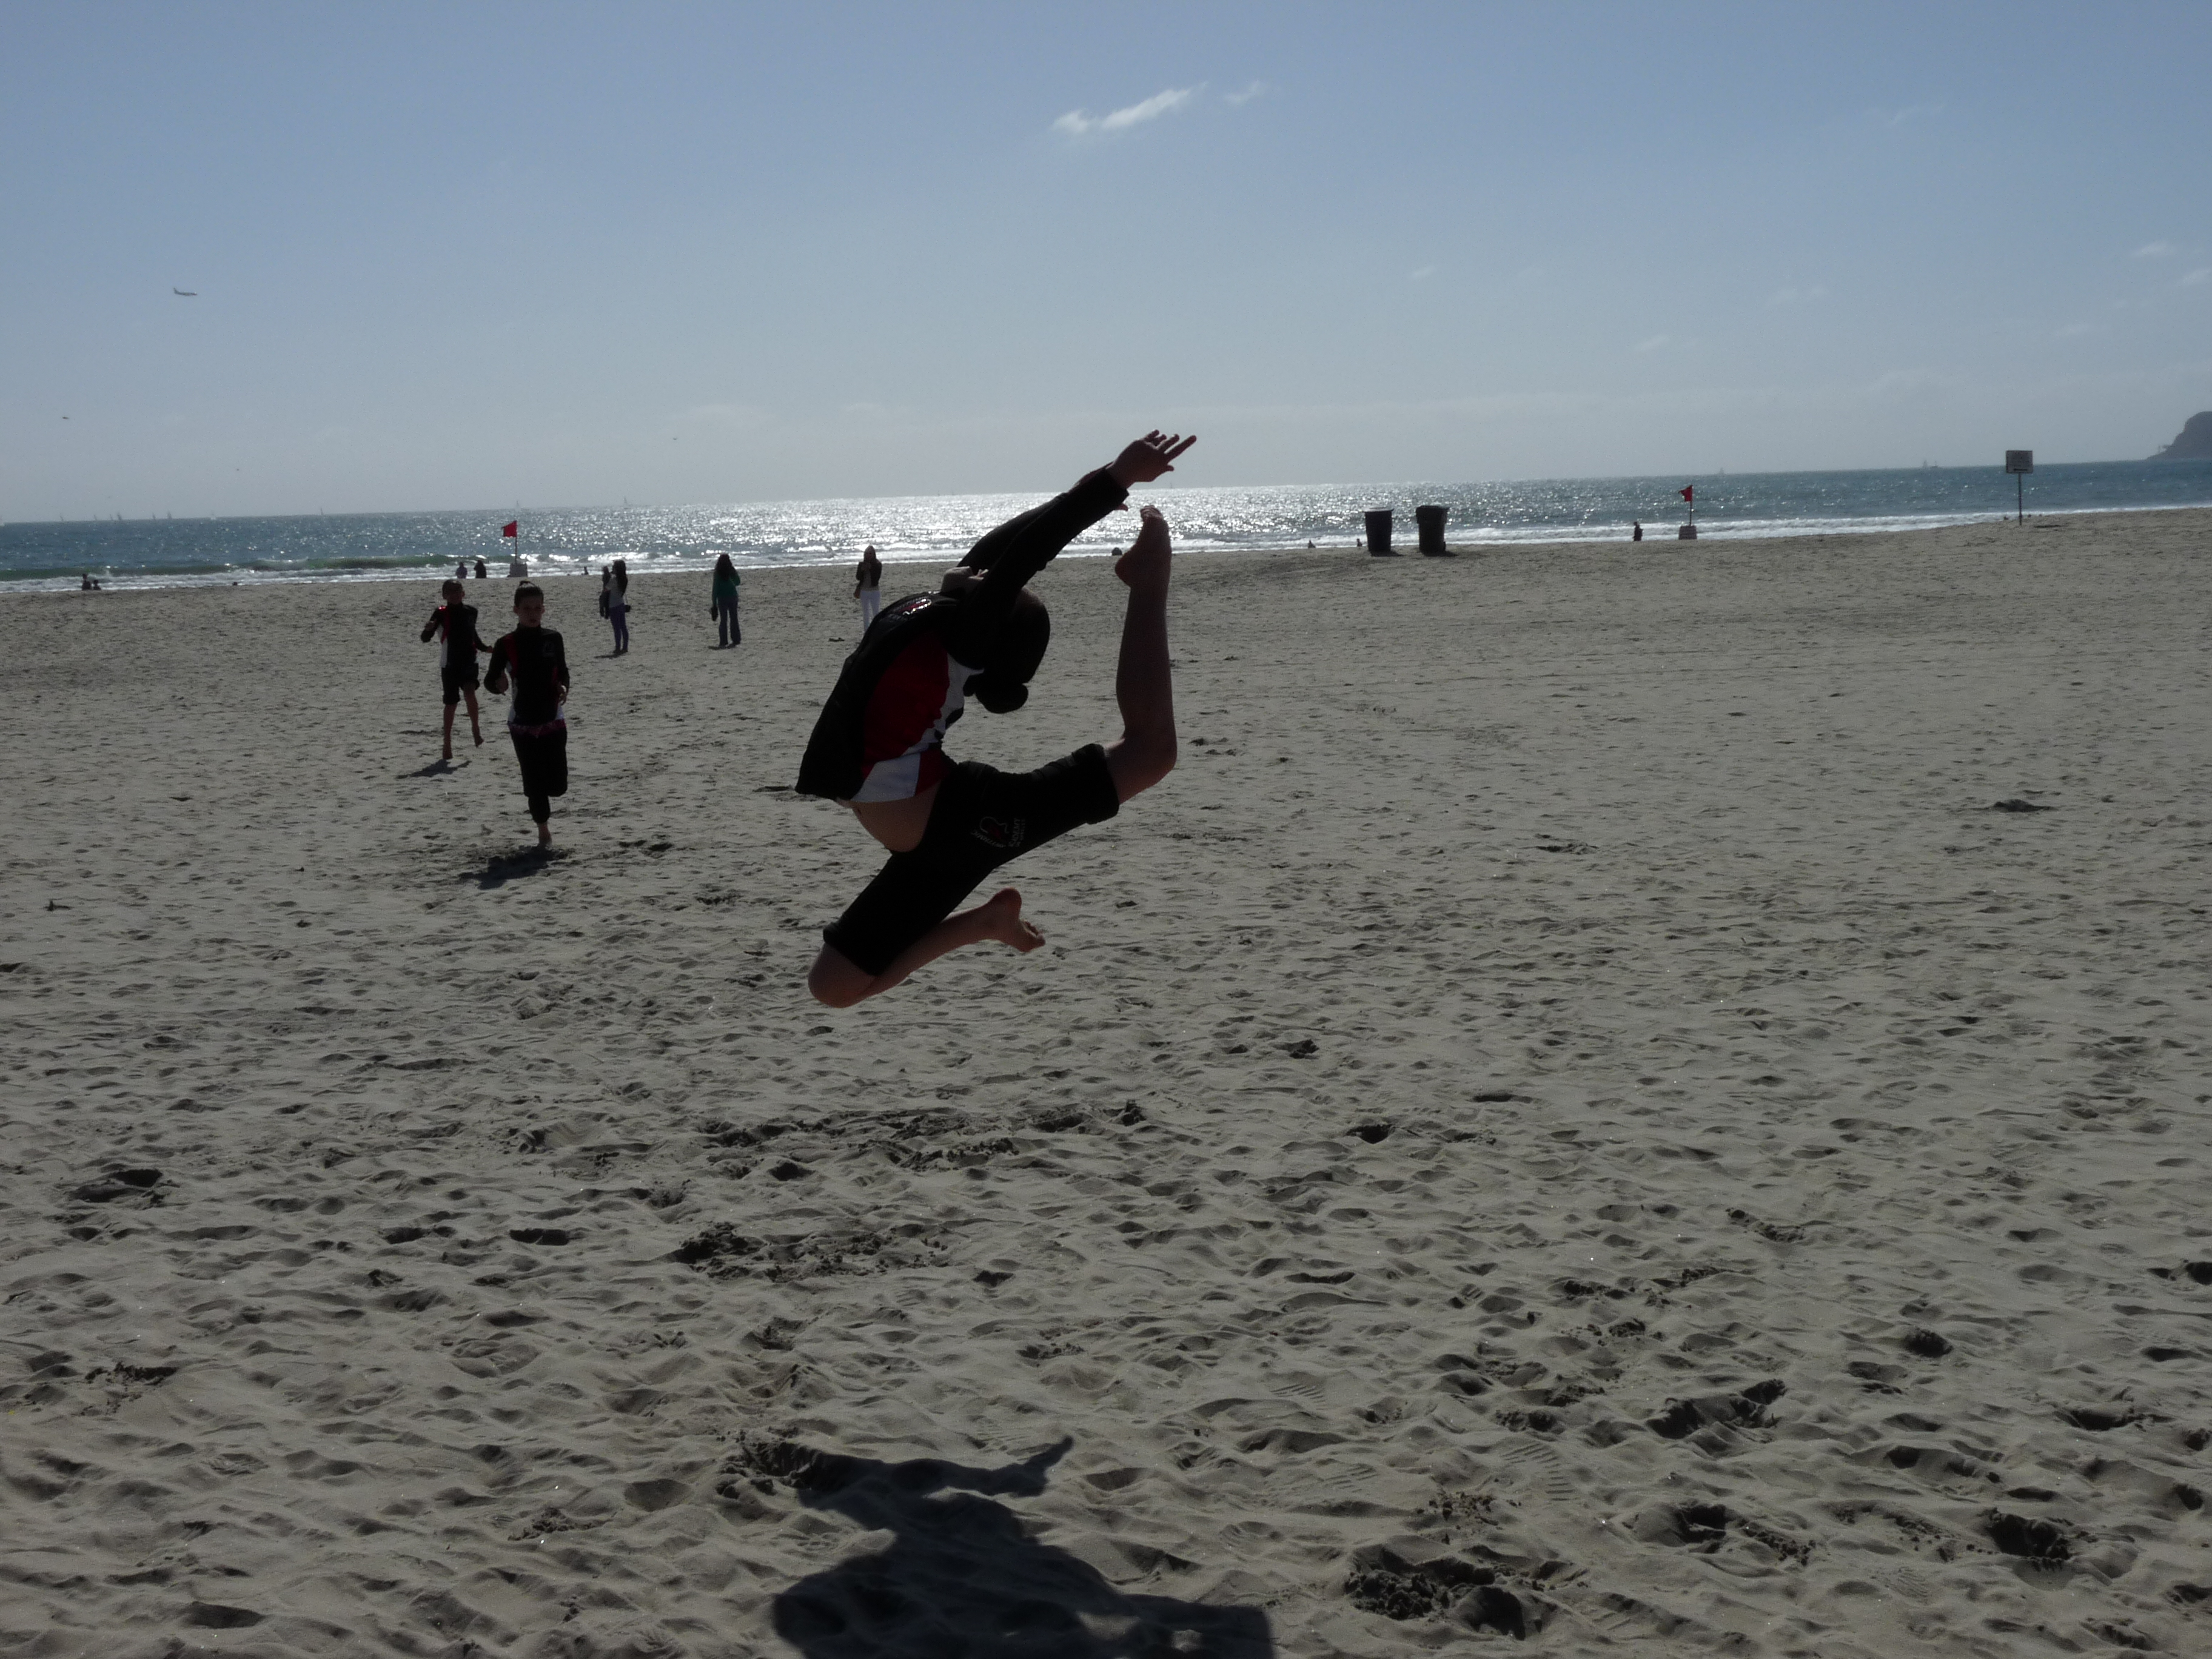 Danielle doing double stag on the beach.